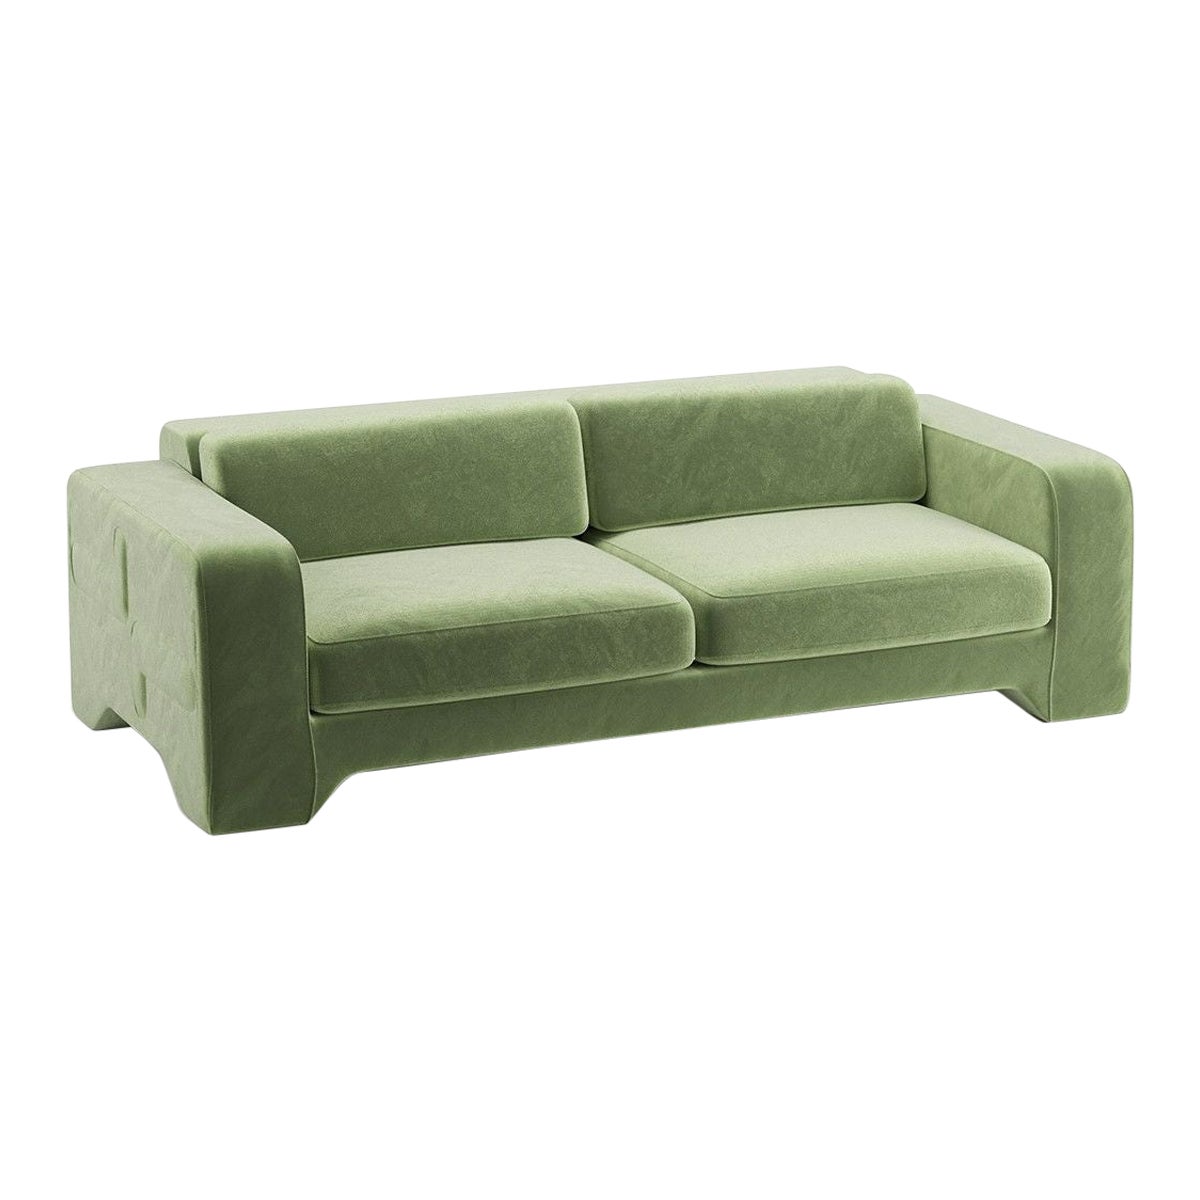 Popus Editions Giovanna 4 Seater Sofa in Green Verone Velvet Upholstery For Sale